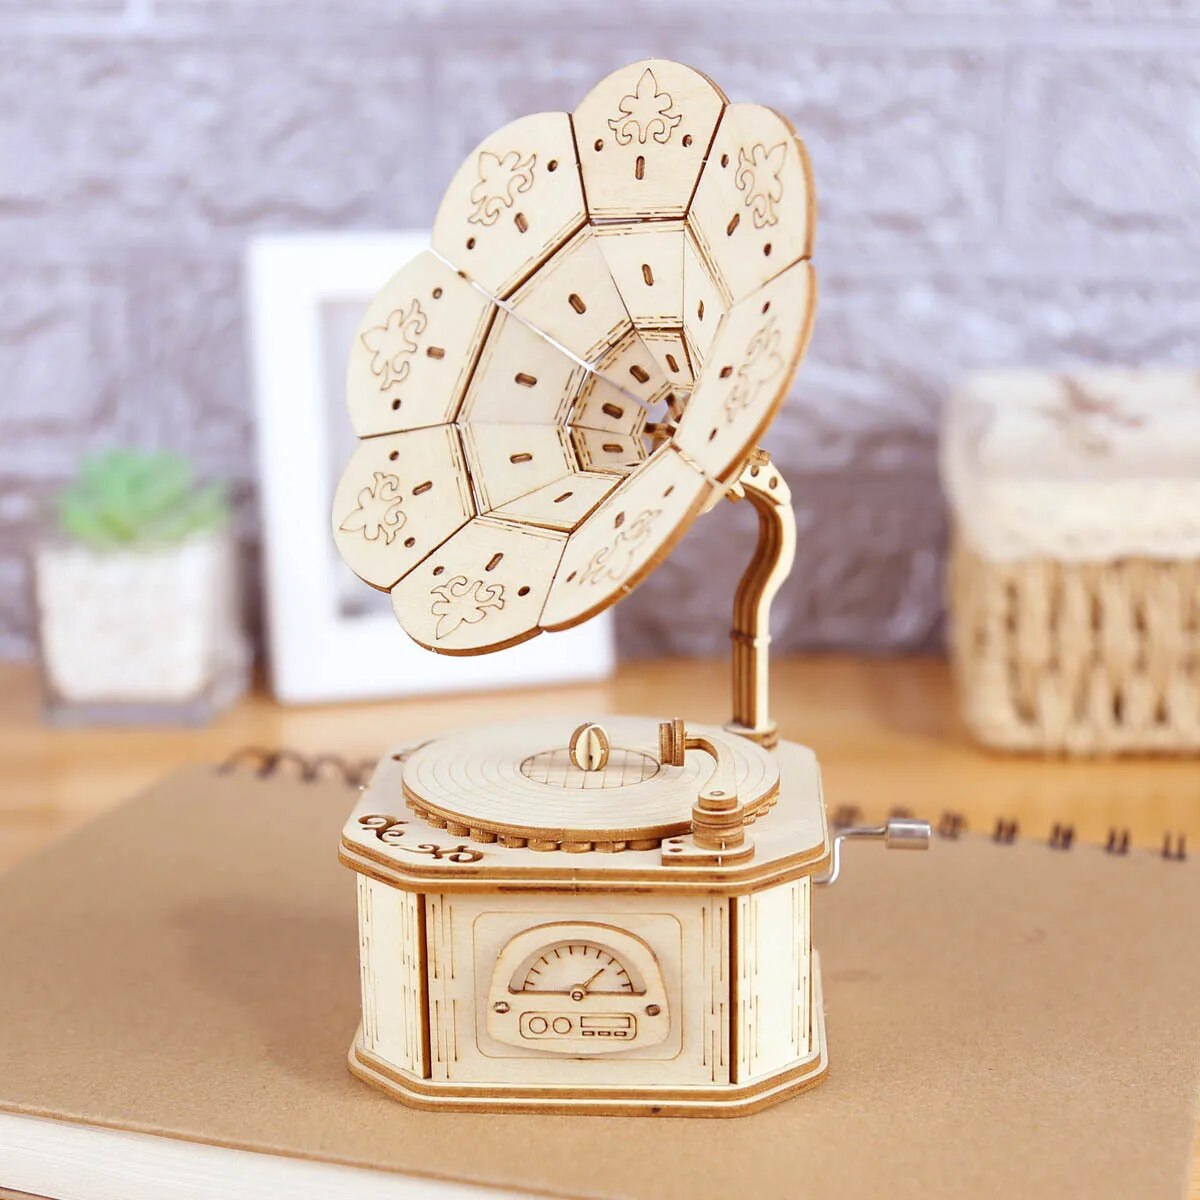 3D Wooden Music Box Puzzle Models Kits for Child Handmade Construction Block Toy DIY Assemble Machanism Gramophone Gift To Build